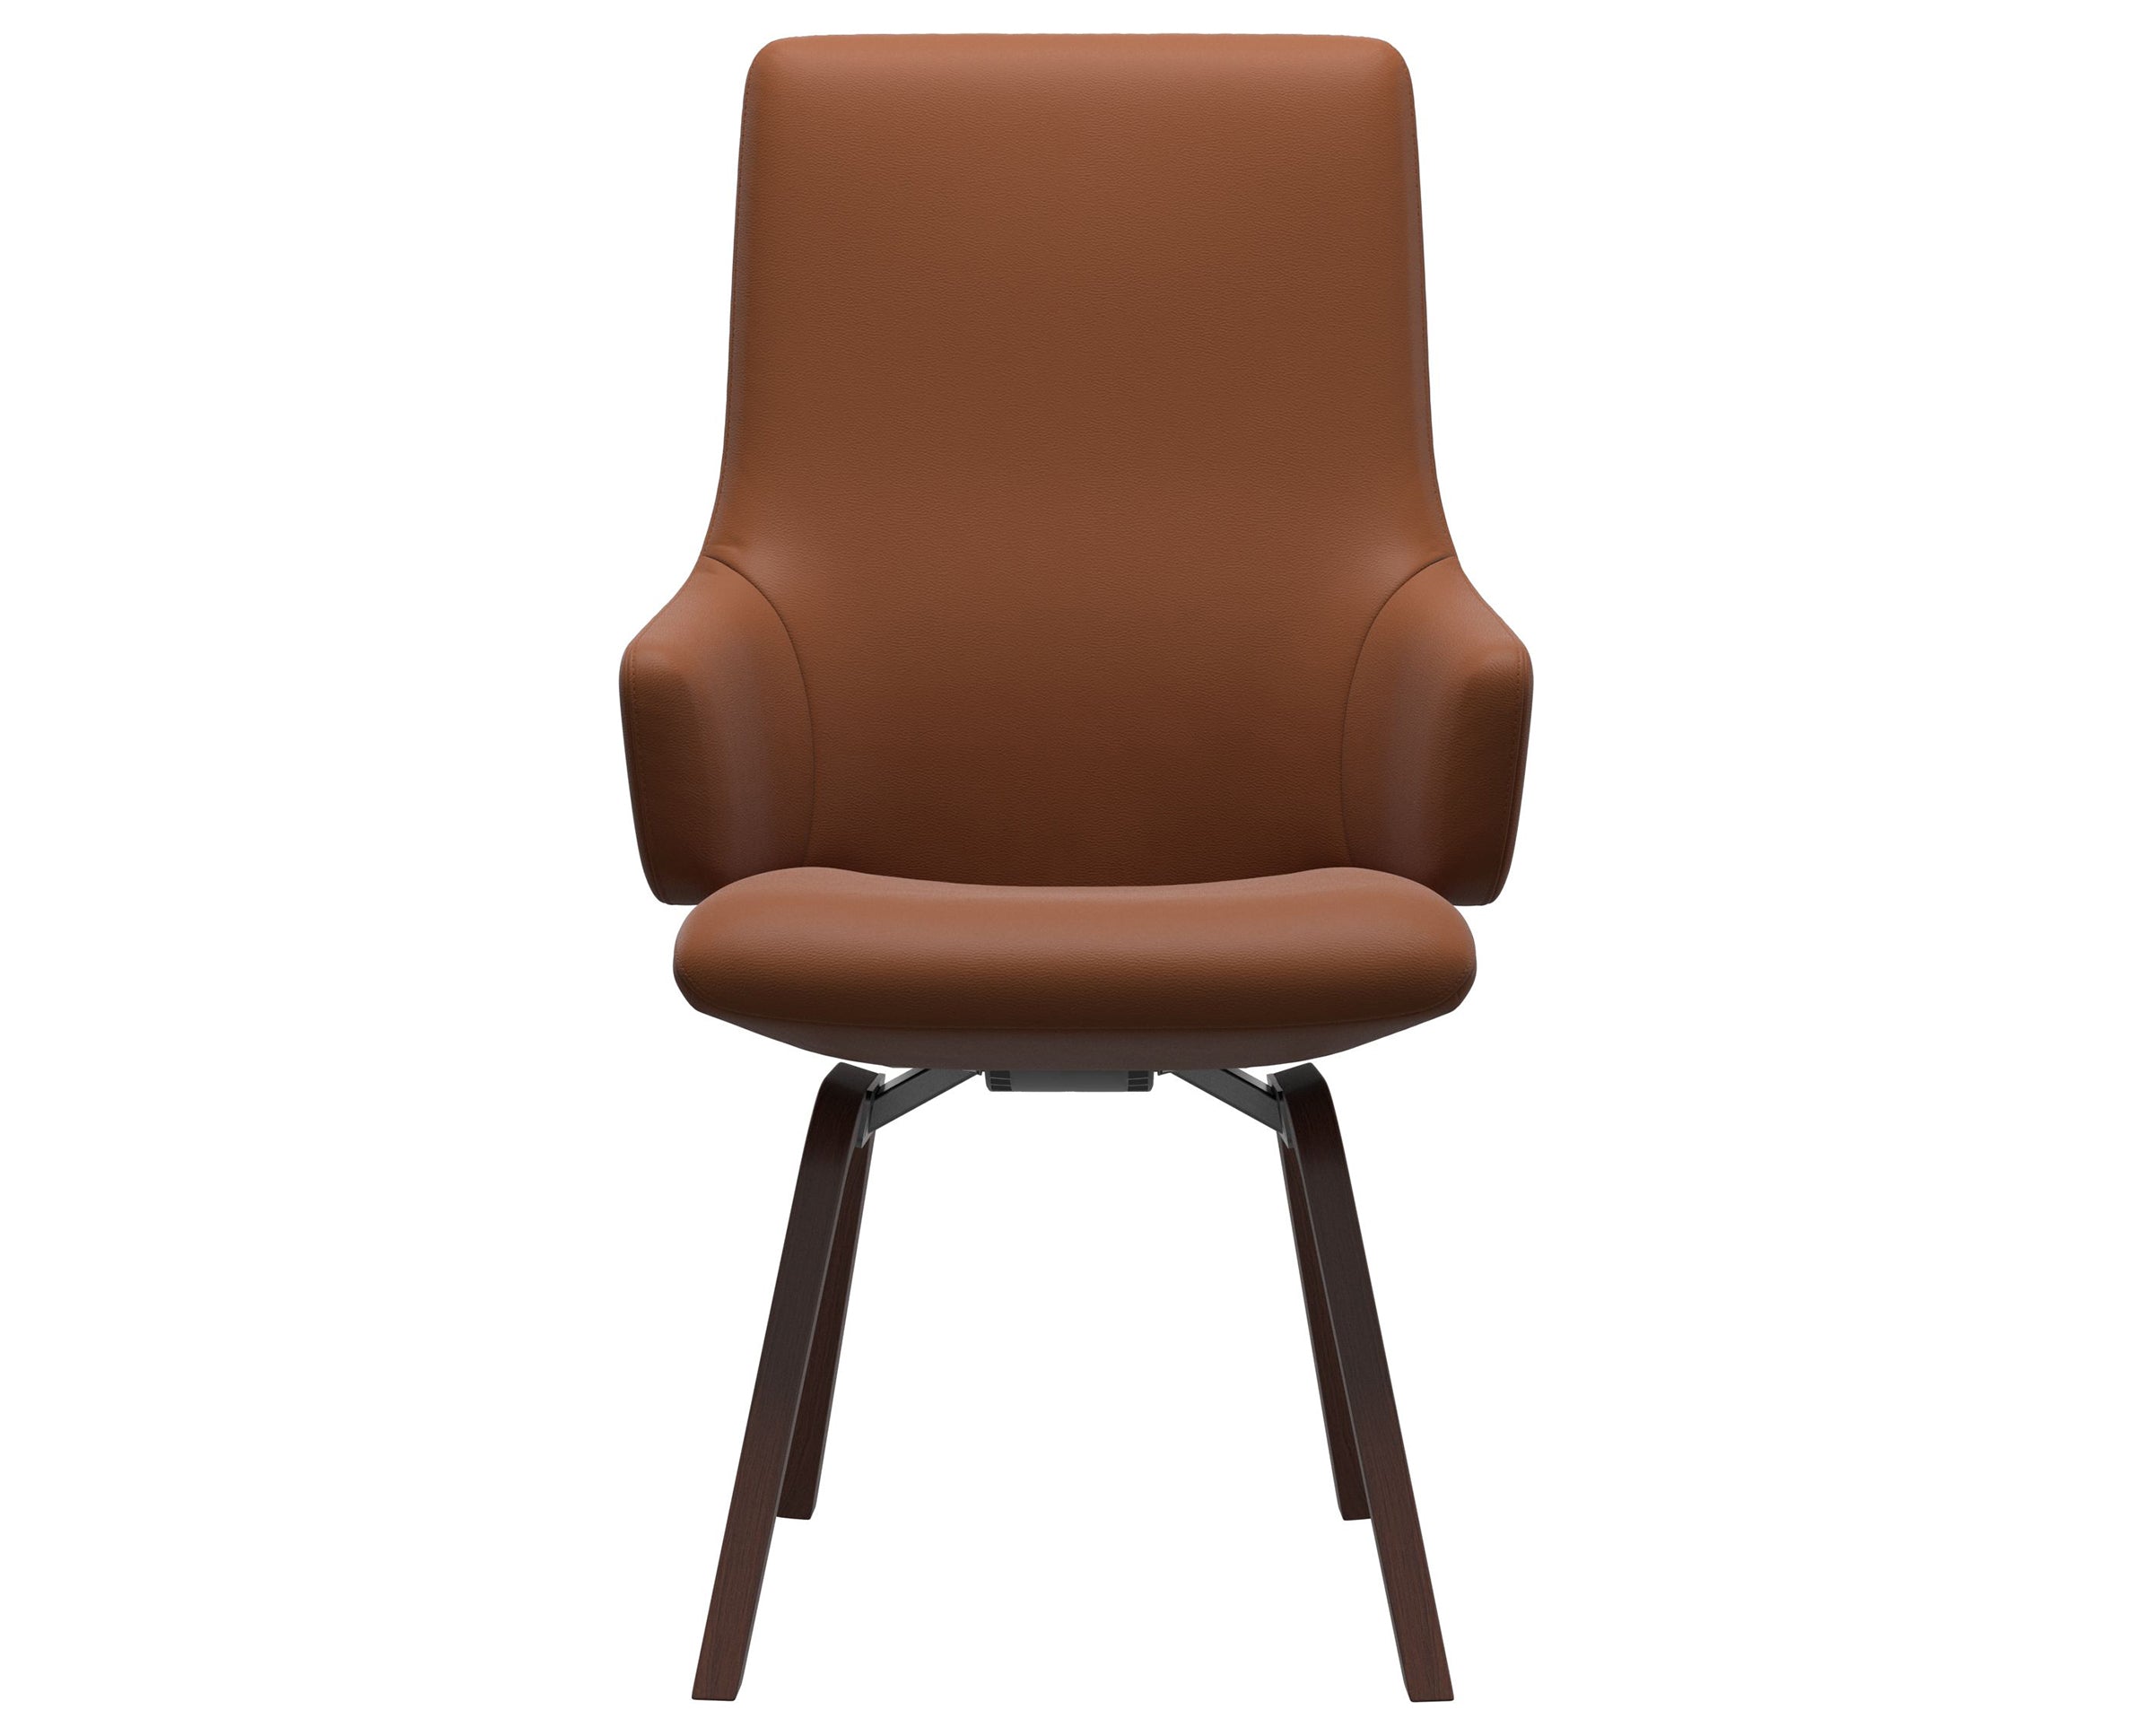 Paloma Leather New Cognac and Walnut Base | Stressless Laurel High Back D200 Dining Chair w/Arms | Valley Ridge Furniture